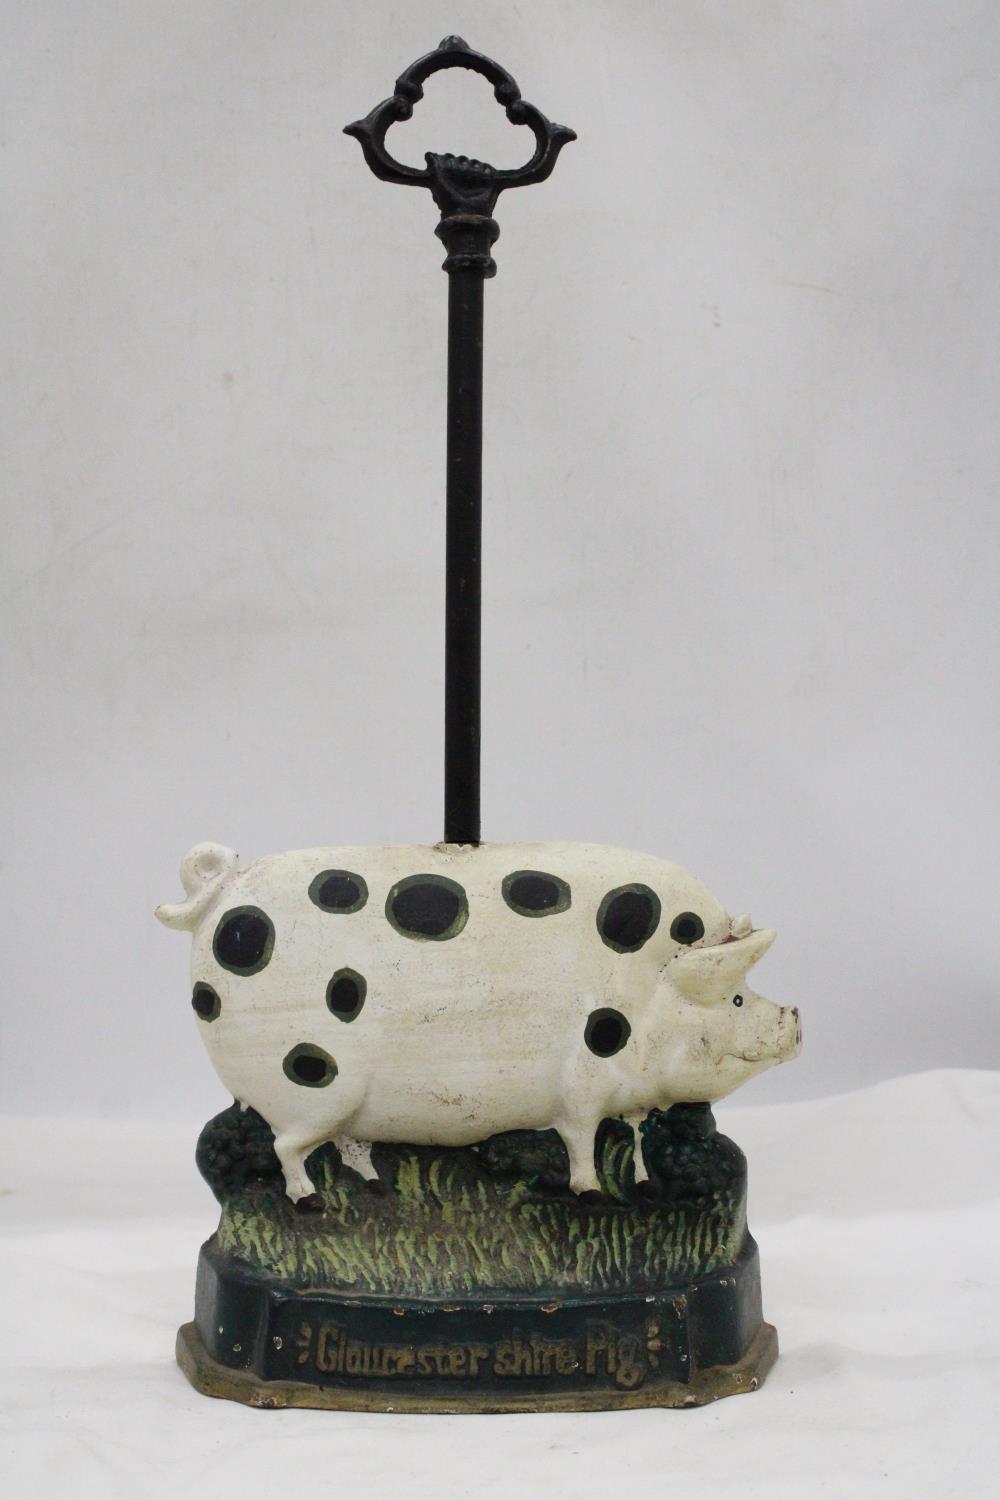 A HEAVY CAST GLOUCESTERSHIRE BLACK SPOT PIG DOORSTOP 18 INCH (H) - Image 2 of 5